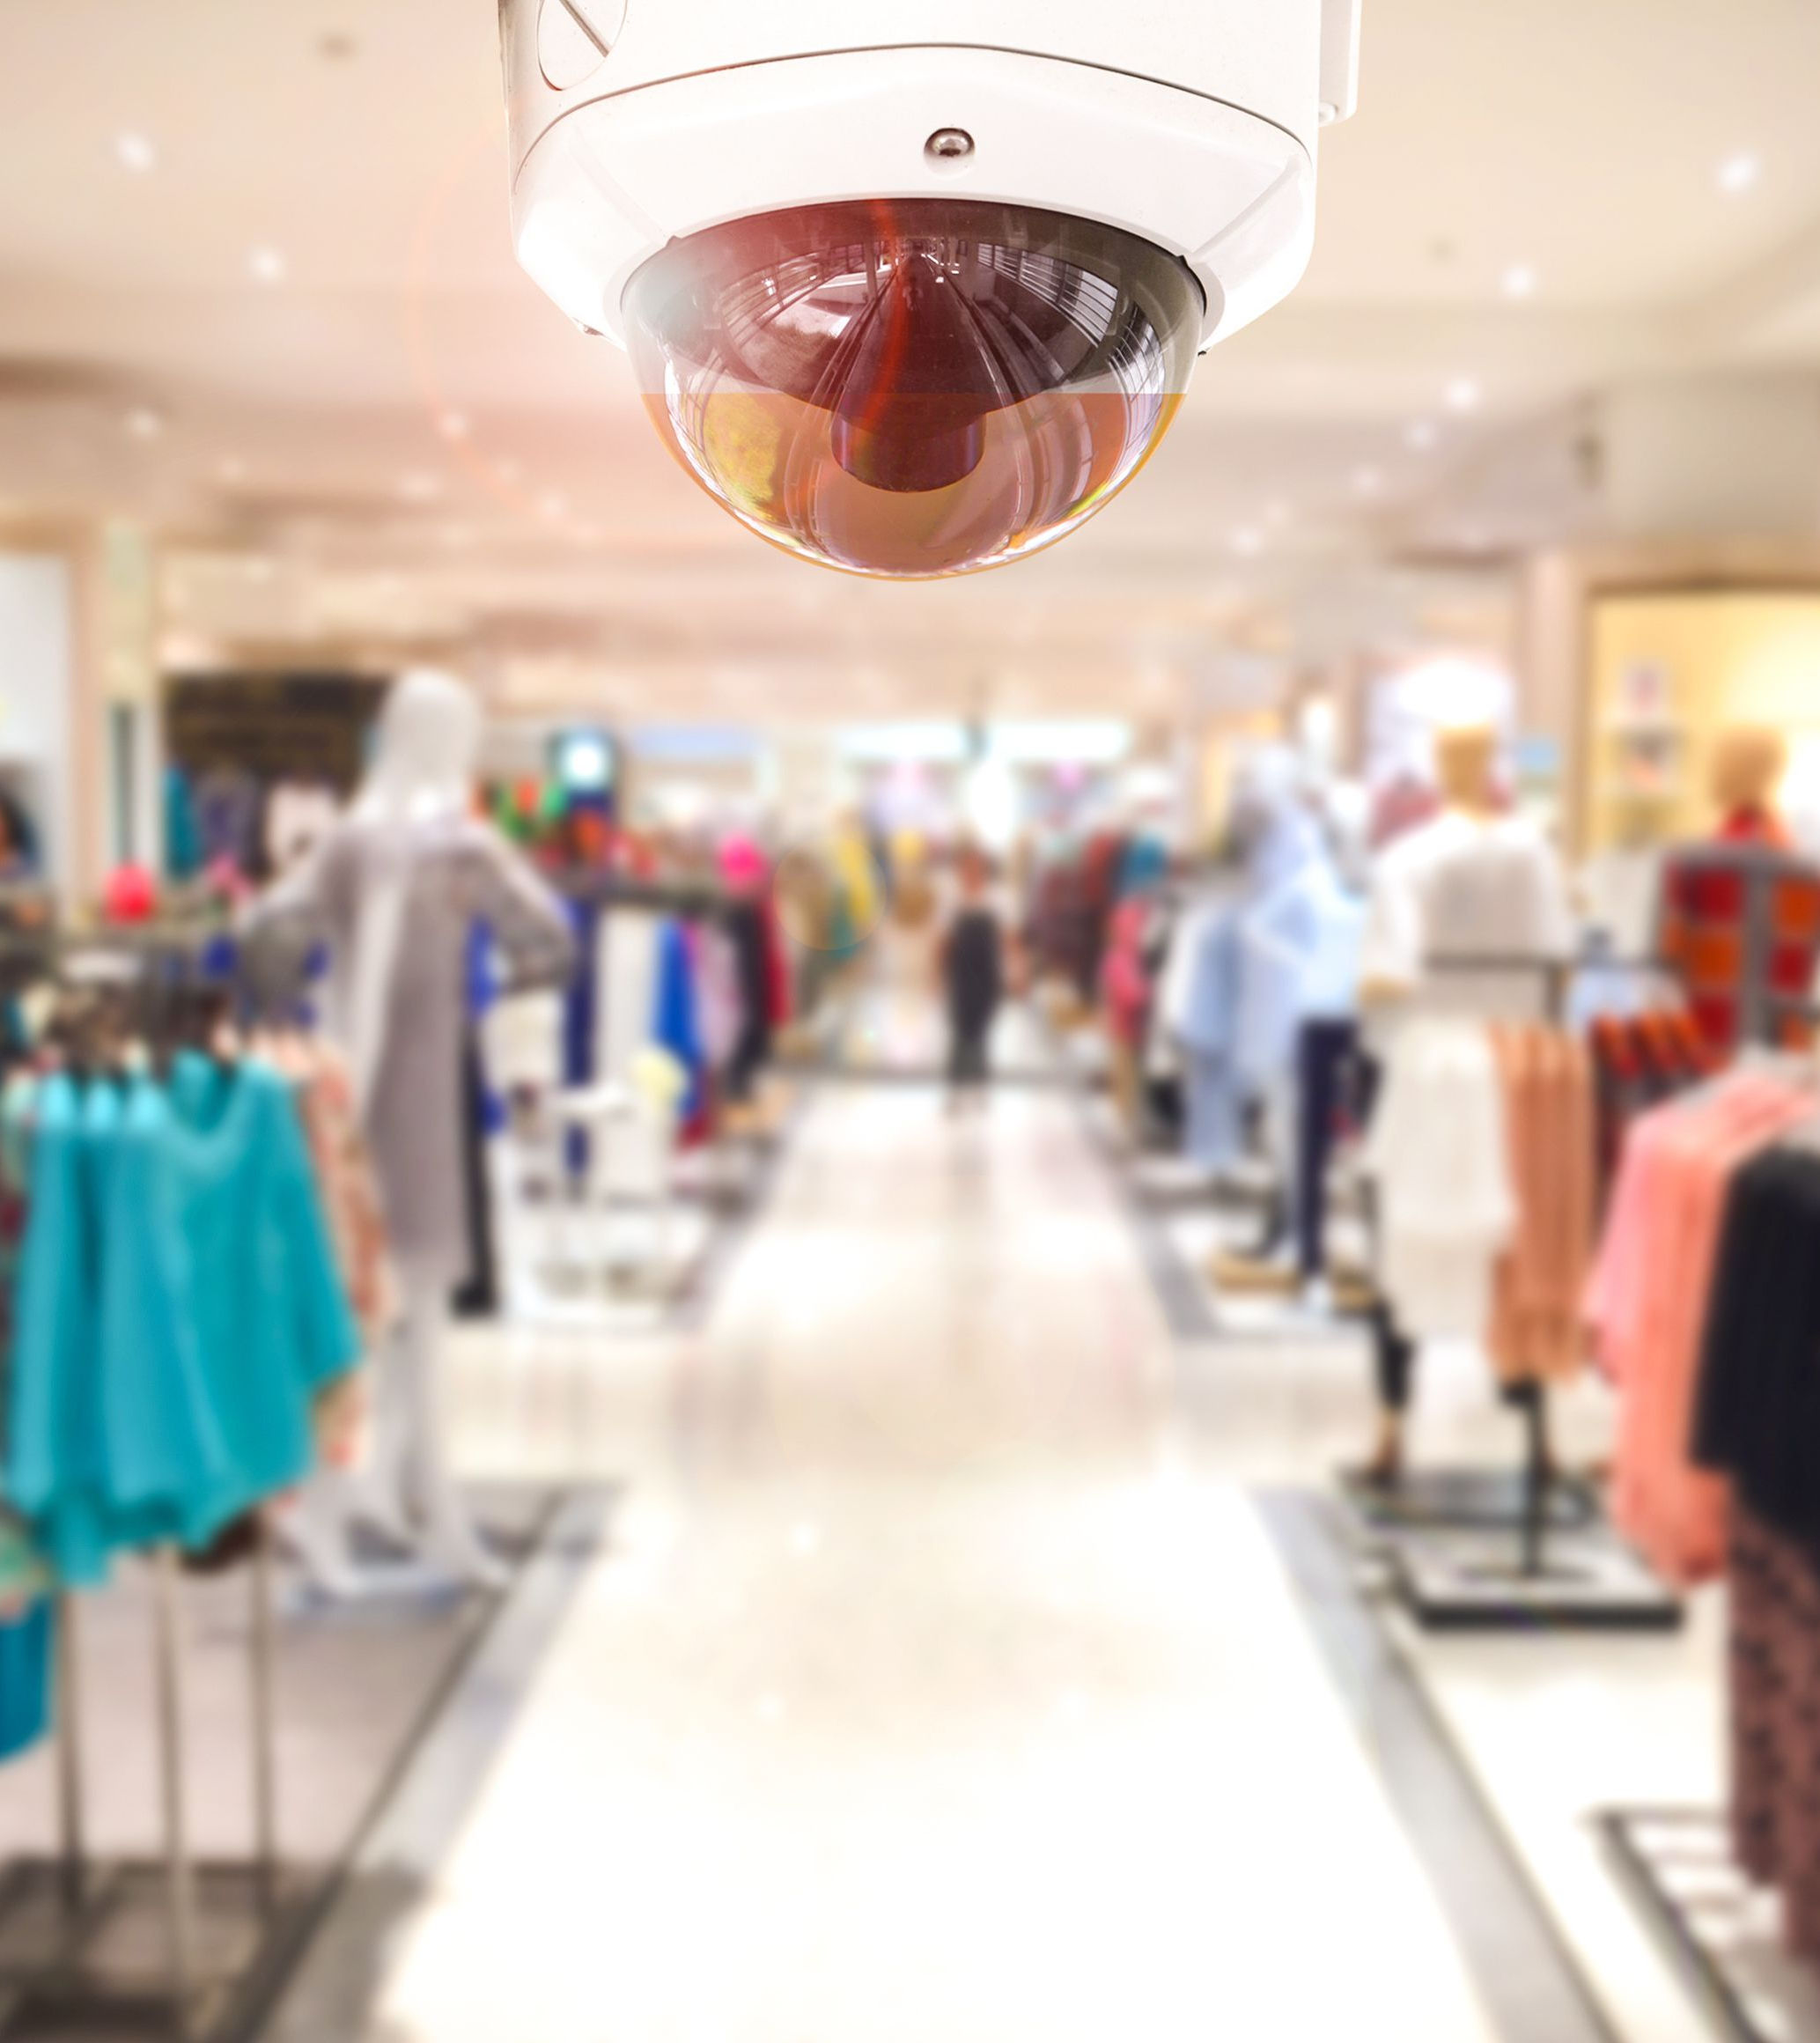 commercial CCTV camera installed in a clothing store